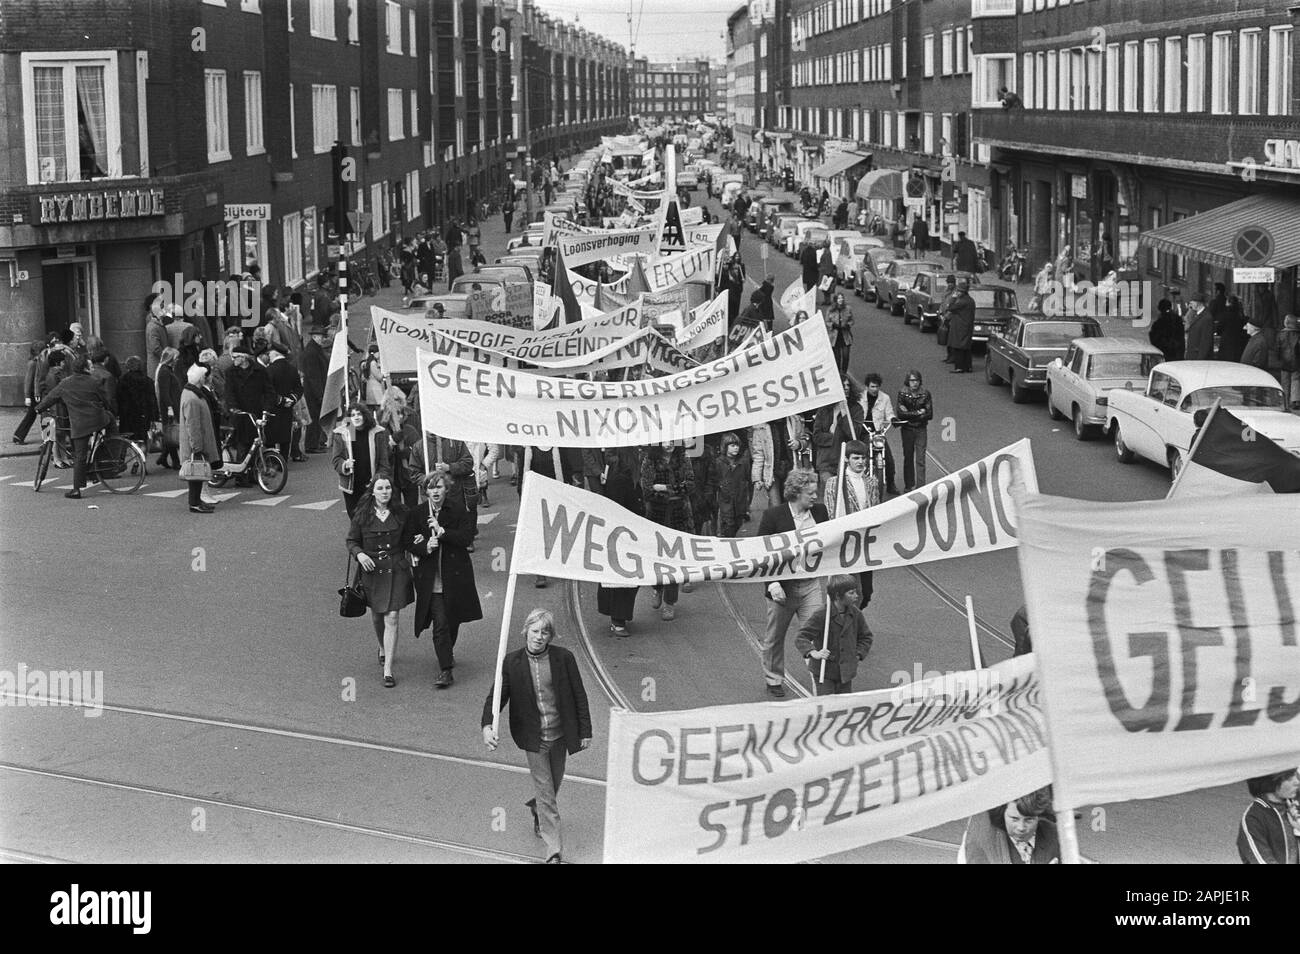 Demonstrative parade in Amsterdam by the Communist Party Description: Protesters with banners and flags draw through the streets of Amsterdam Date: March 27, 1971 Location: Amsterdam, Noord-Holland Keywords : demonstrations, banners, flags Institution name: CPN Stock Photo